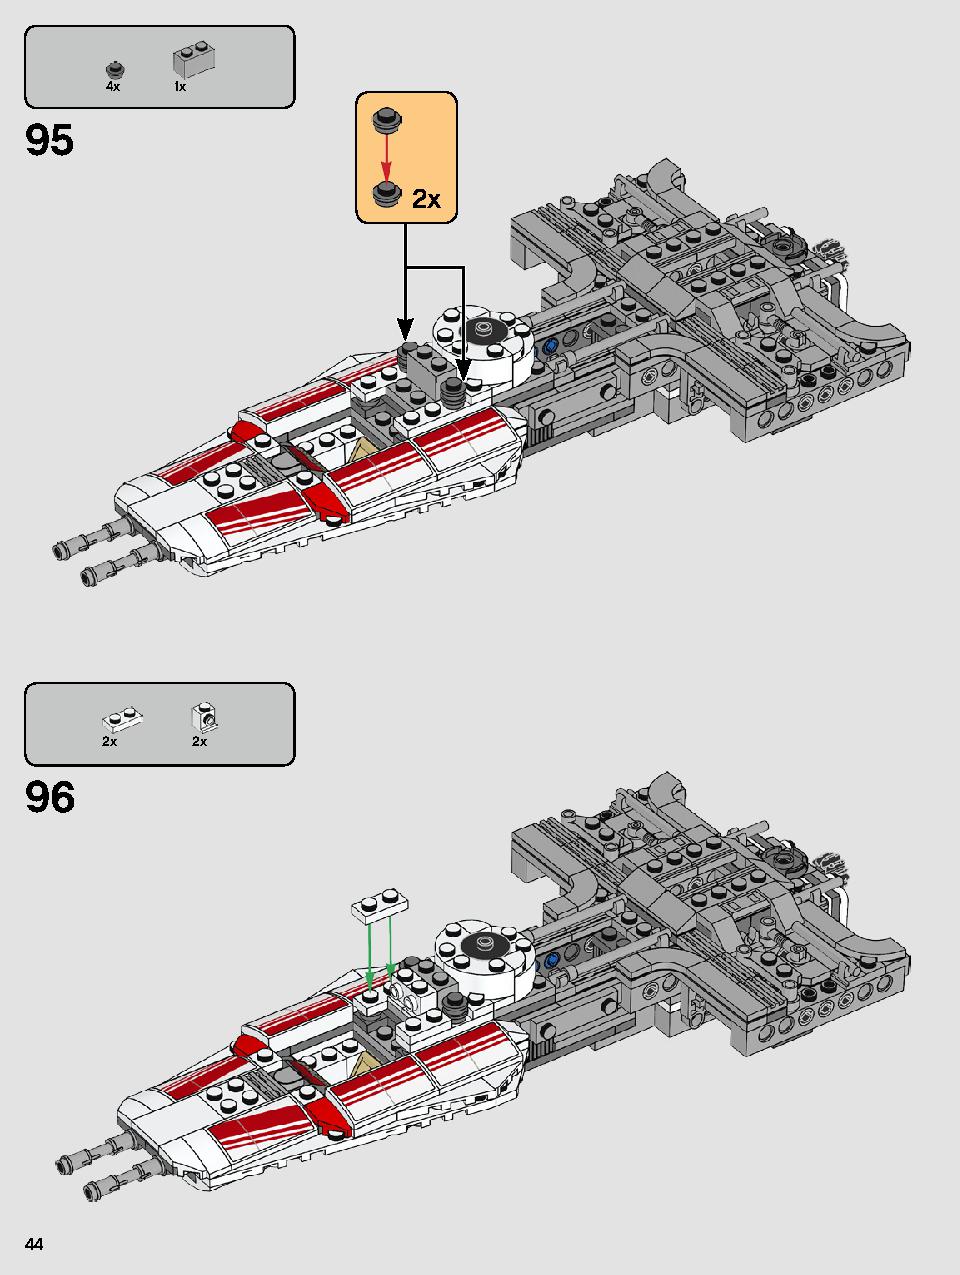 Resistance Y-Wing Starfighter 75249 LEGO information LEGO instructions 44 page